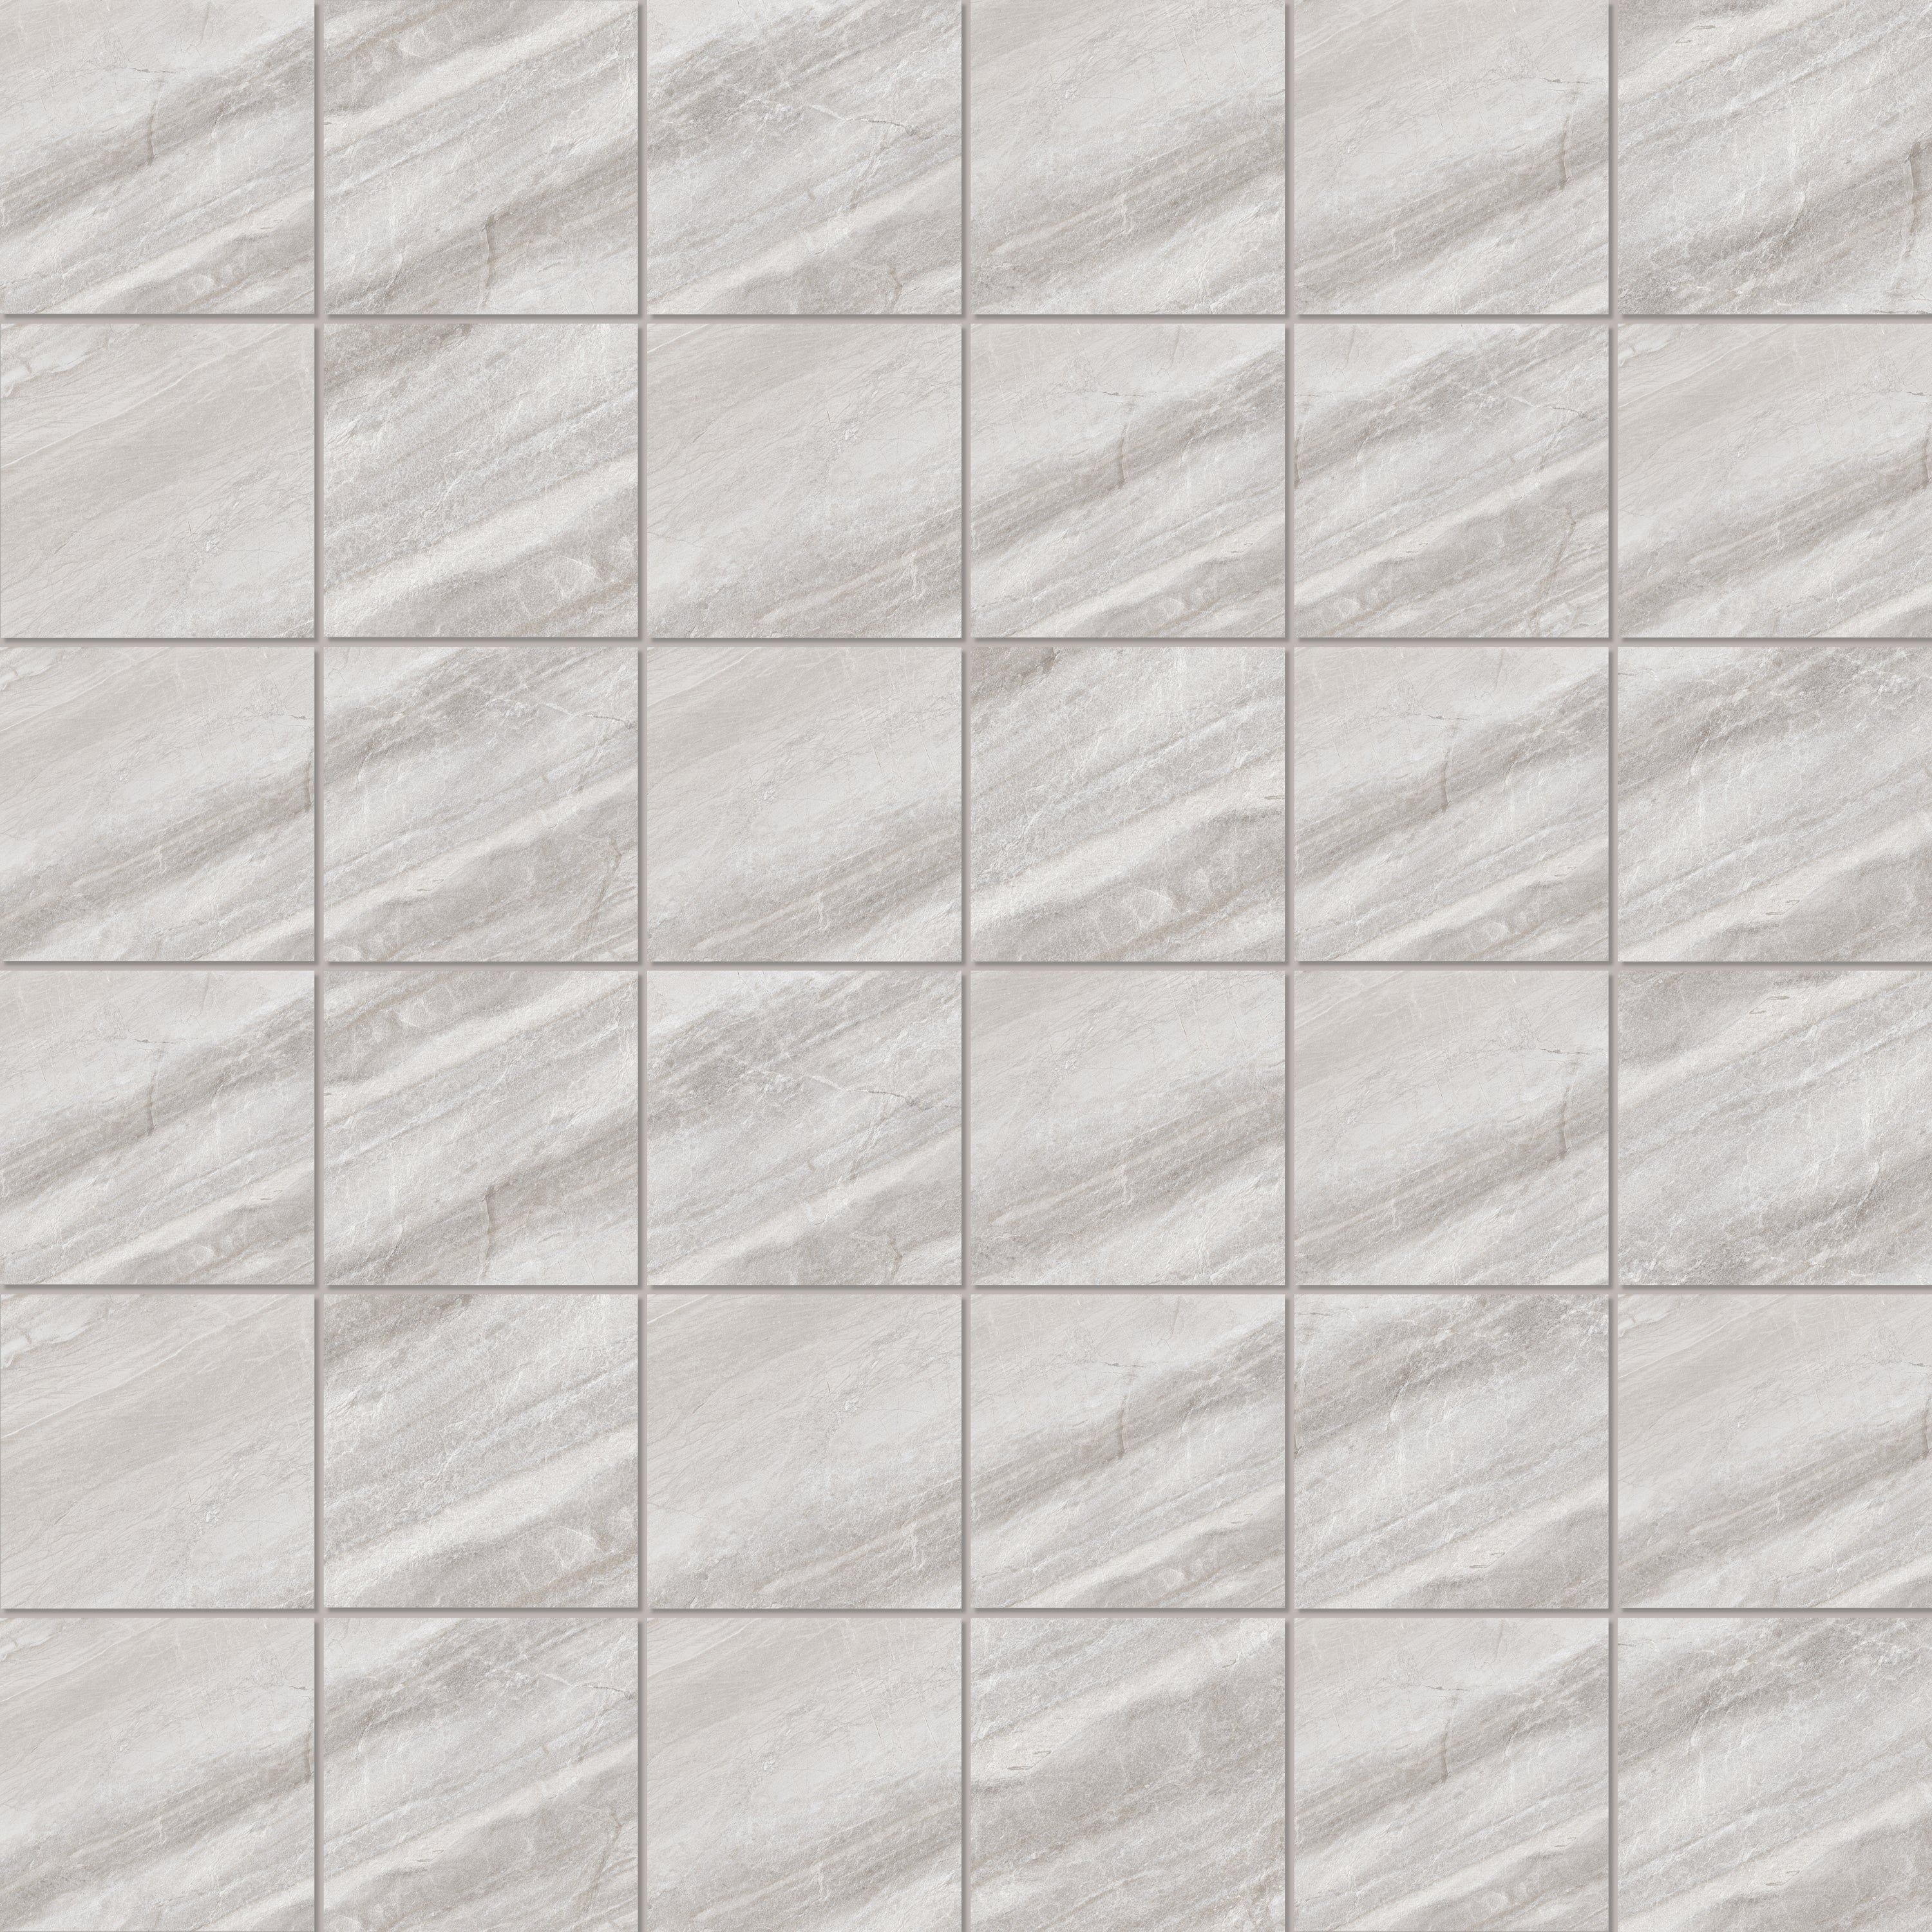 landmark contract barcelona taupe straight stack 2x2 mosaic 12x12x8mm matte pressed porcelain tile distributed by surface group international